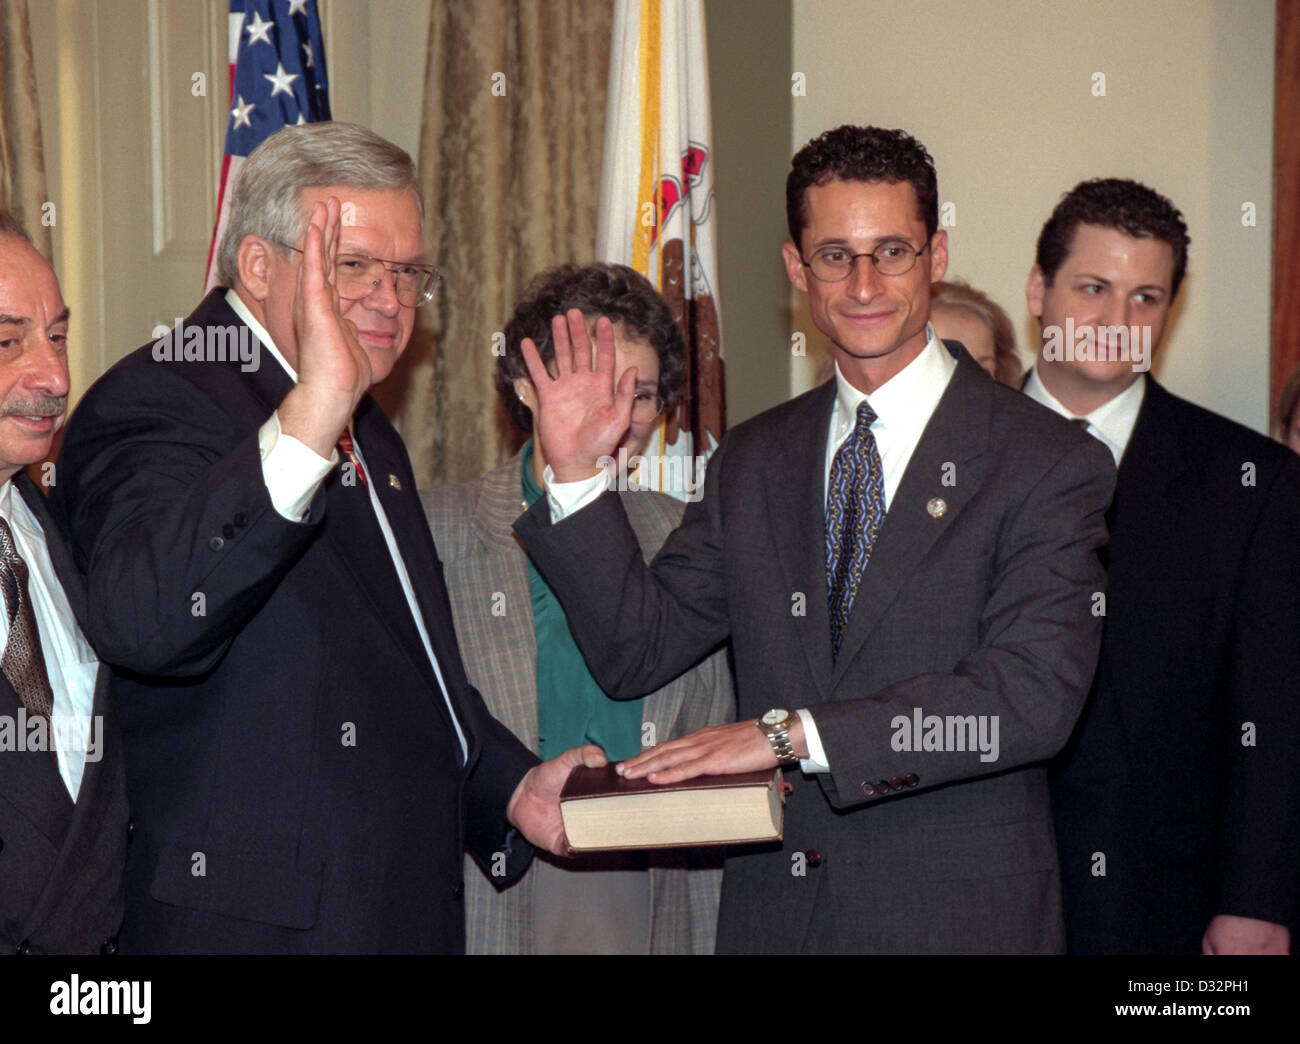 Speaker of the House Denis Hastert (L) administers the oath of office to Rep. Alan Weiner of New York as his family looks on January 6, 1999 at the start of the 106th Congress. The oath is a recreation as the formal oath is administered to the entire congress as a body on the floor of the House. Stock Photo